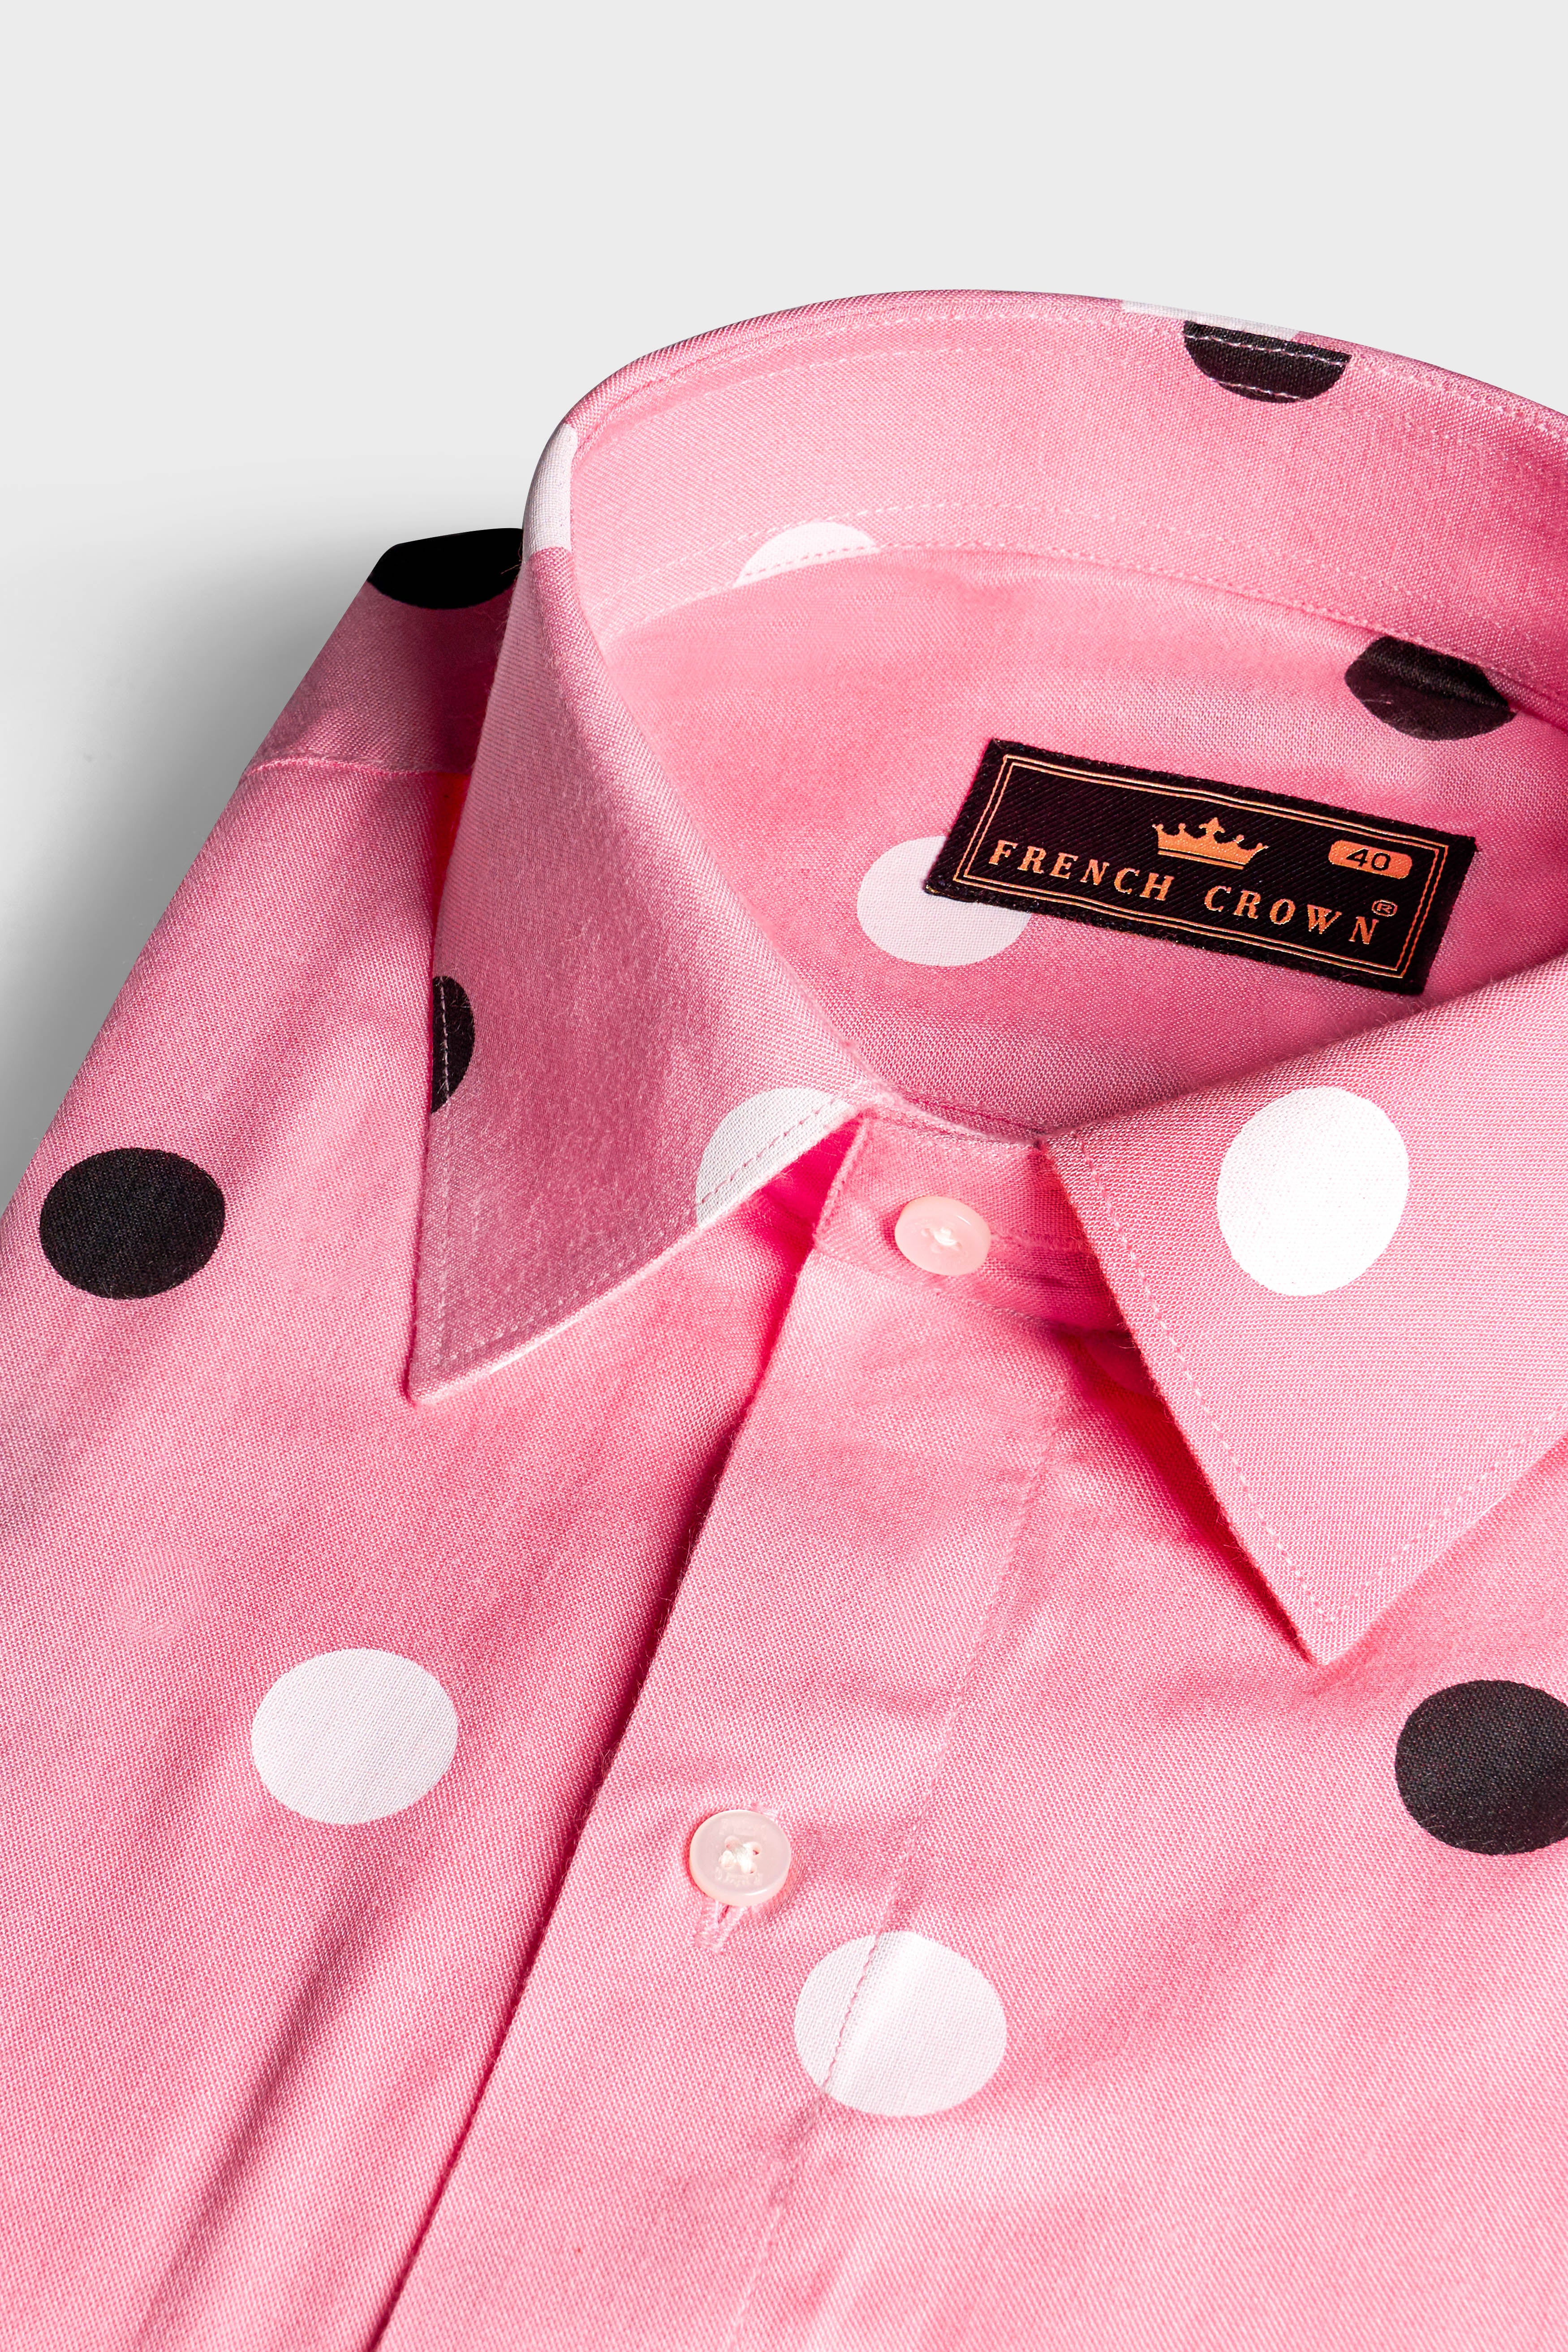 Flamingo Pink with Black and White Polka Dotted Premium Tencel Shirt